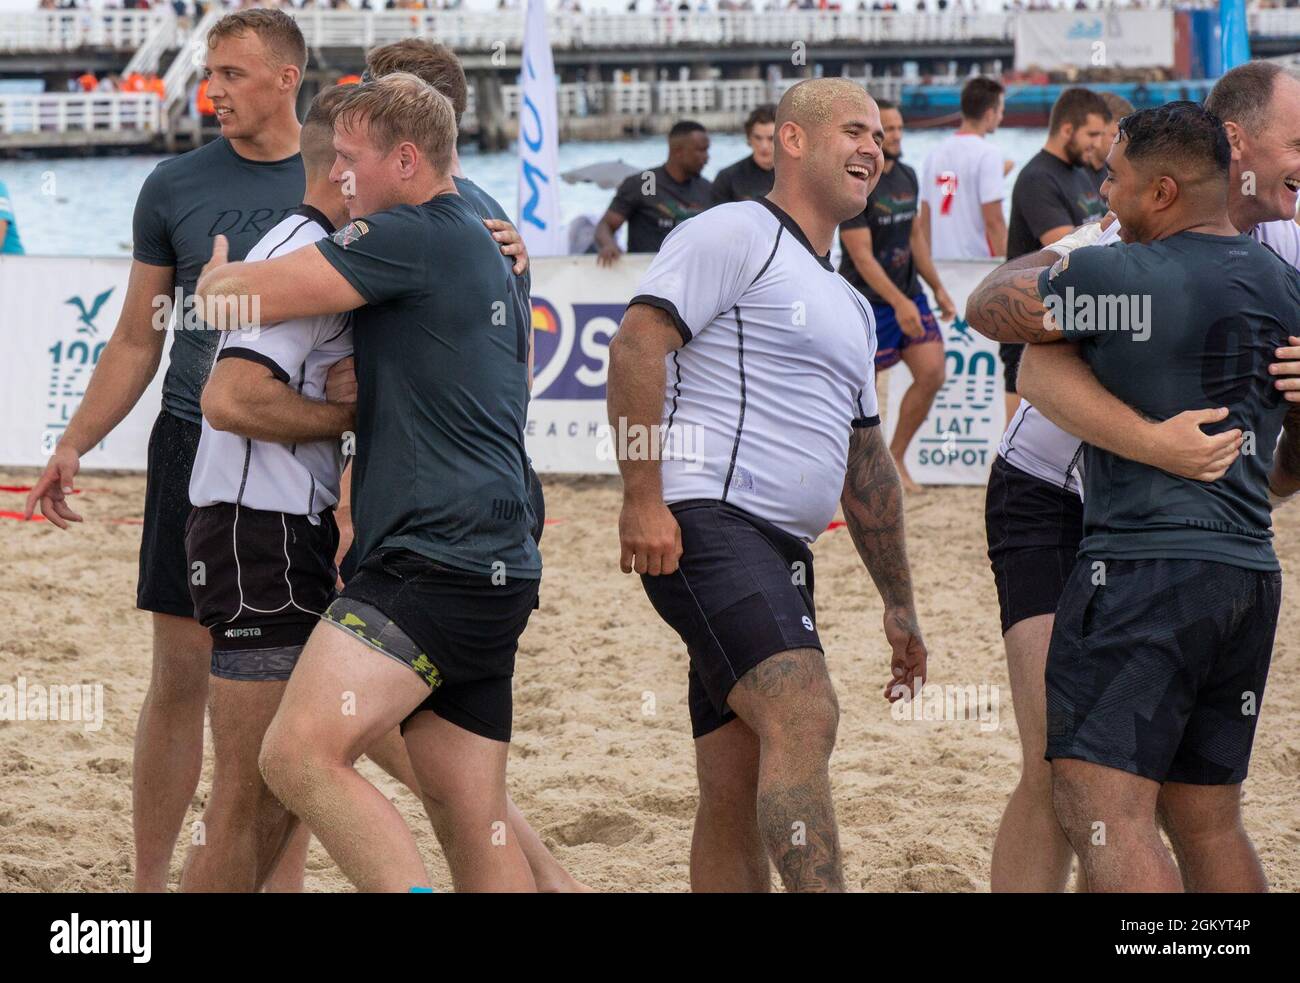 Soldiers with 3rd Battalion “Dark Rifles,” 161st Infantry Regiment shake hands and congratulate the opposing team after competing against each other at the Sopot International Beach Rugby Tournament in Sopot, Poland, July 31, 2021. The Soldiers competed in the tournament to strengthen bonds with Polish locals and support the Hodura Foundation, which is a foundation that organizes community events such as the rugby tournament. Stock Photo